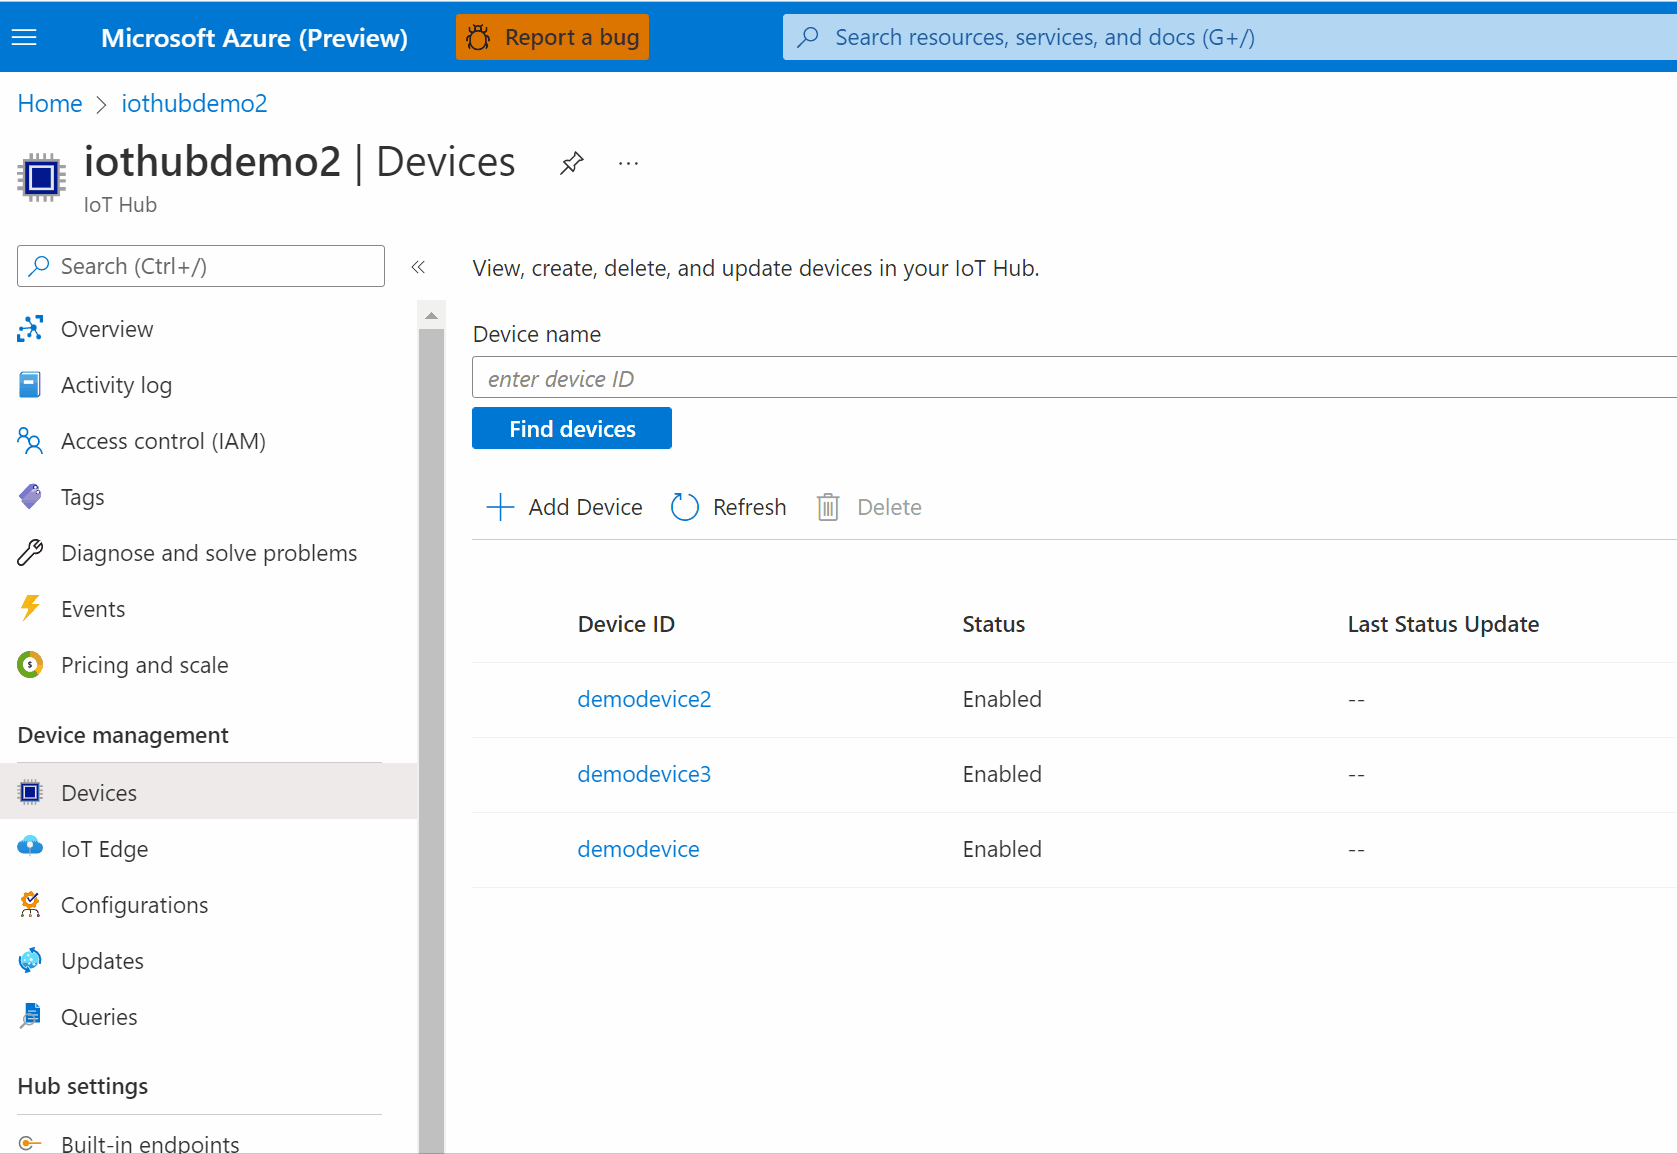 screen capture showing one of the GROUP BY queries from Azure Portal